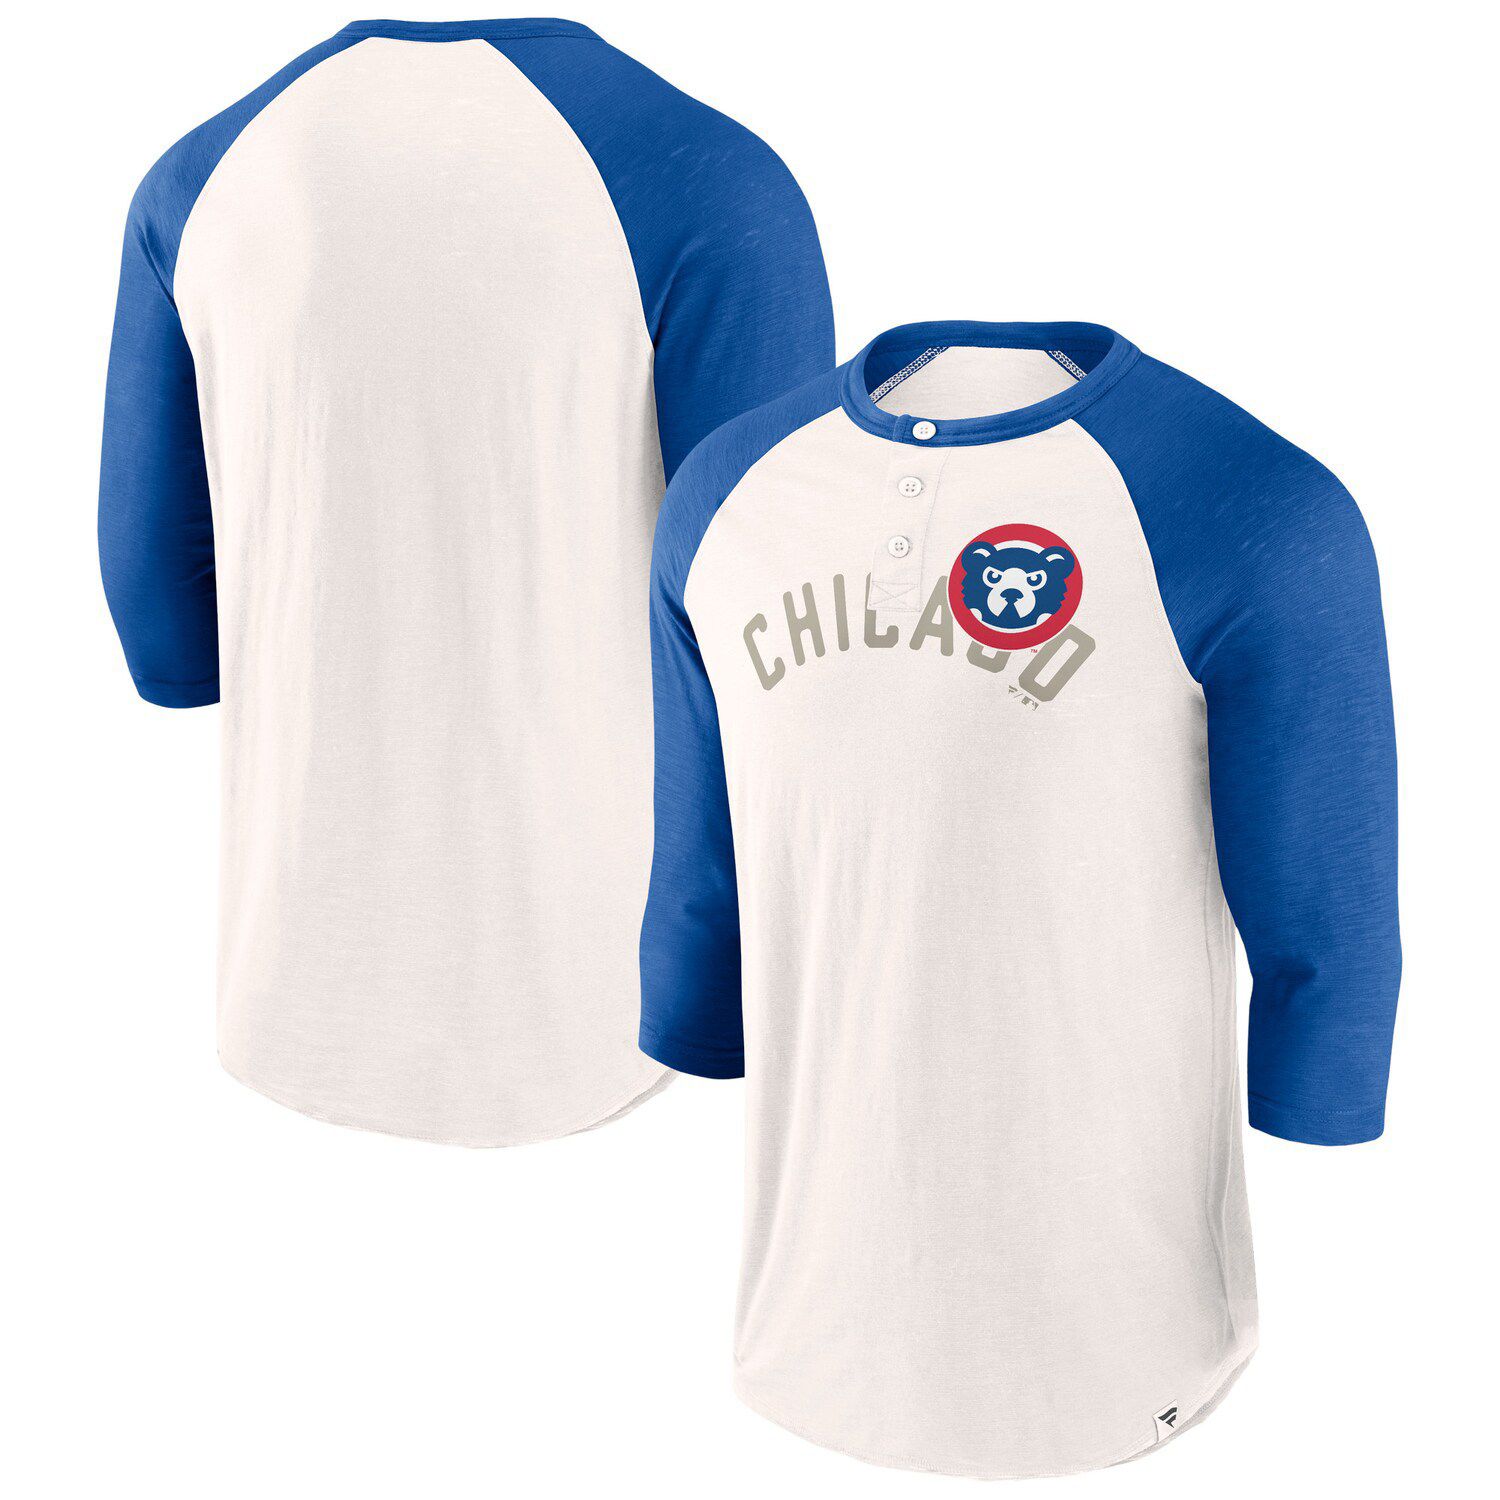 Men's Majestic Heathered Gray/Royal Chicago Cubs Big & Tall Cooperstown  Collection Raglan 3/4-Sleeve